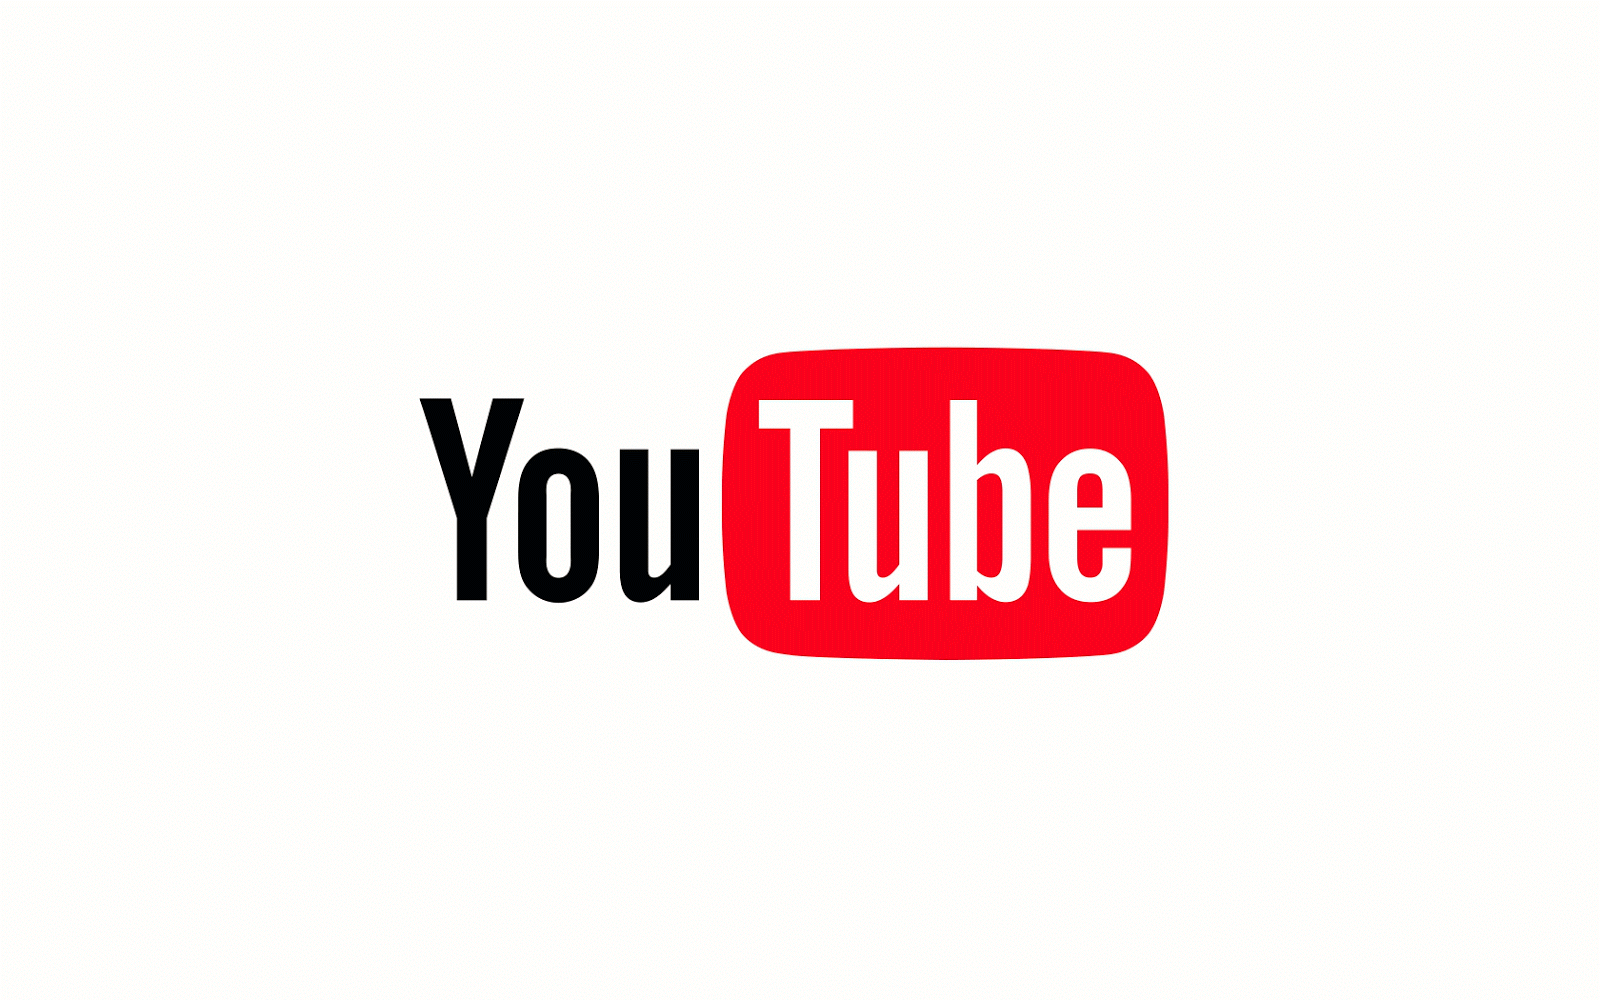 YouTube Official Logo - Official YouTube Blog: A new YouTube look that works for you